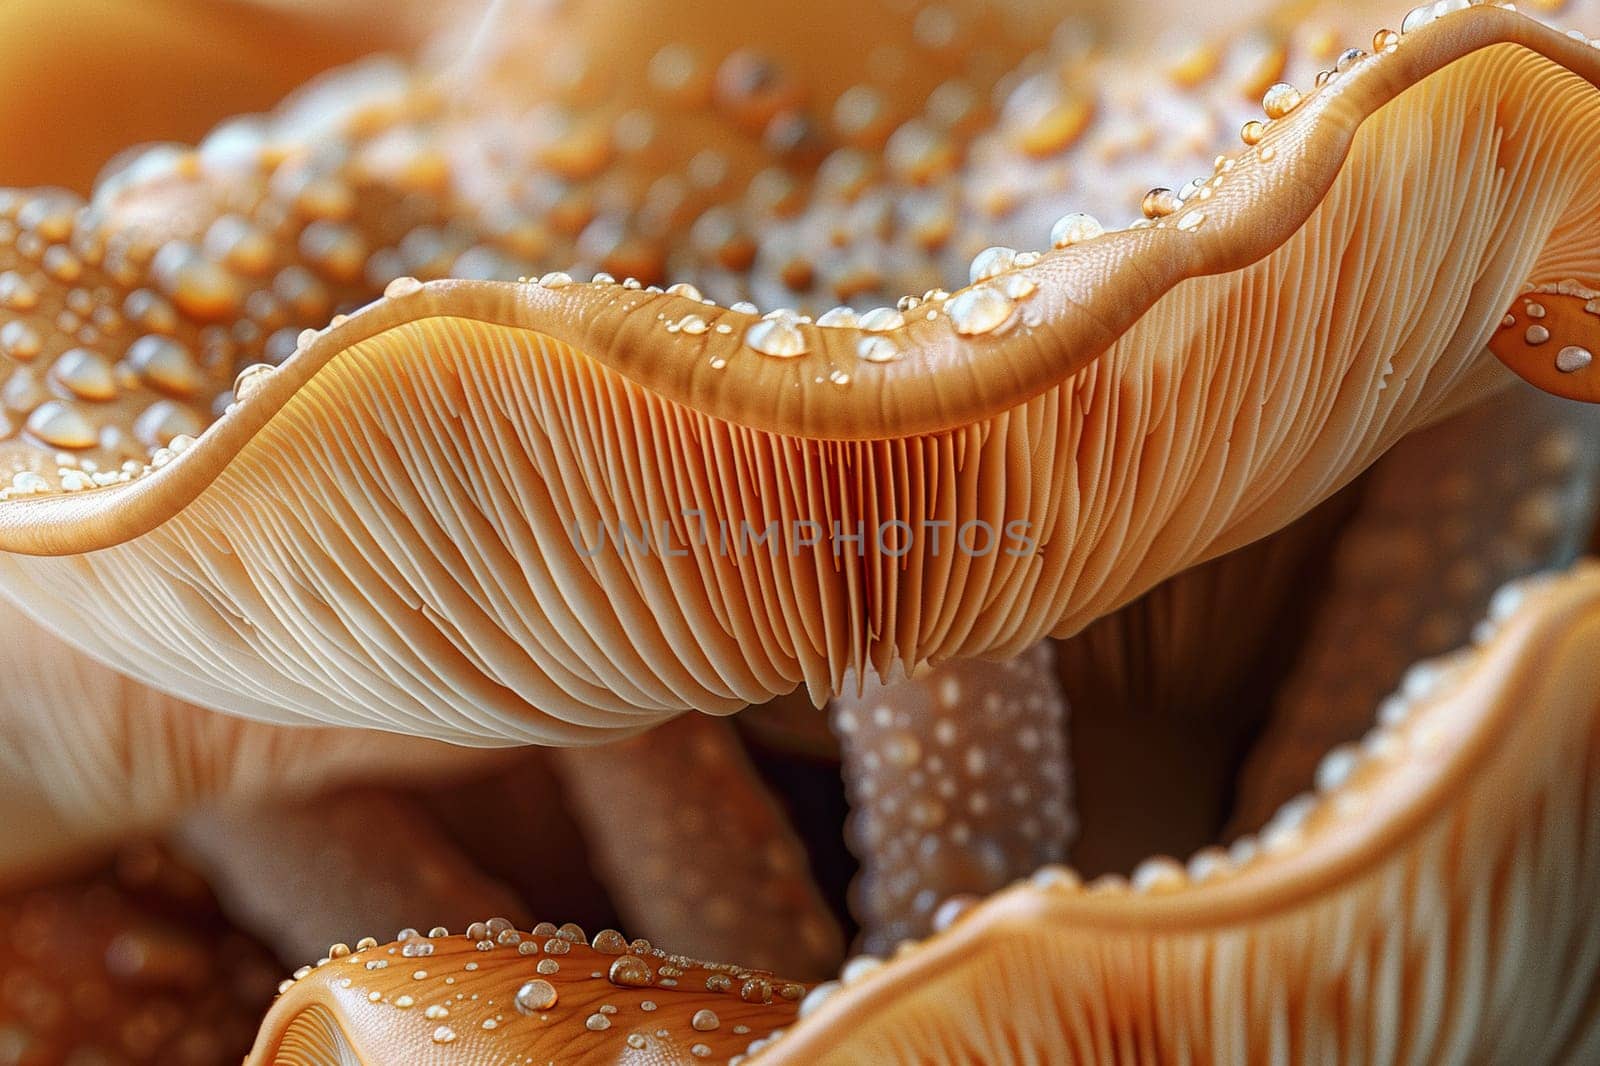 Close-up of mushroom texture with water drops.